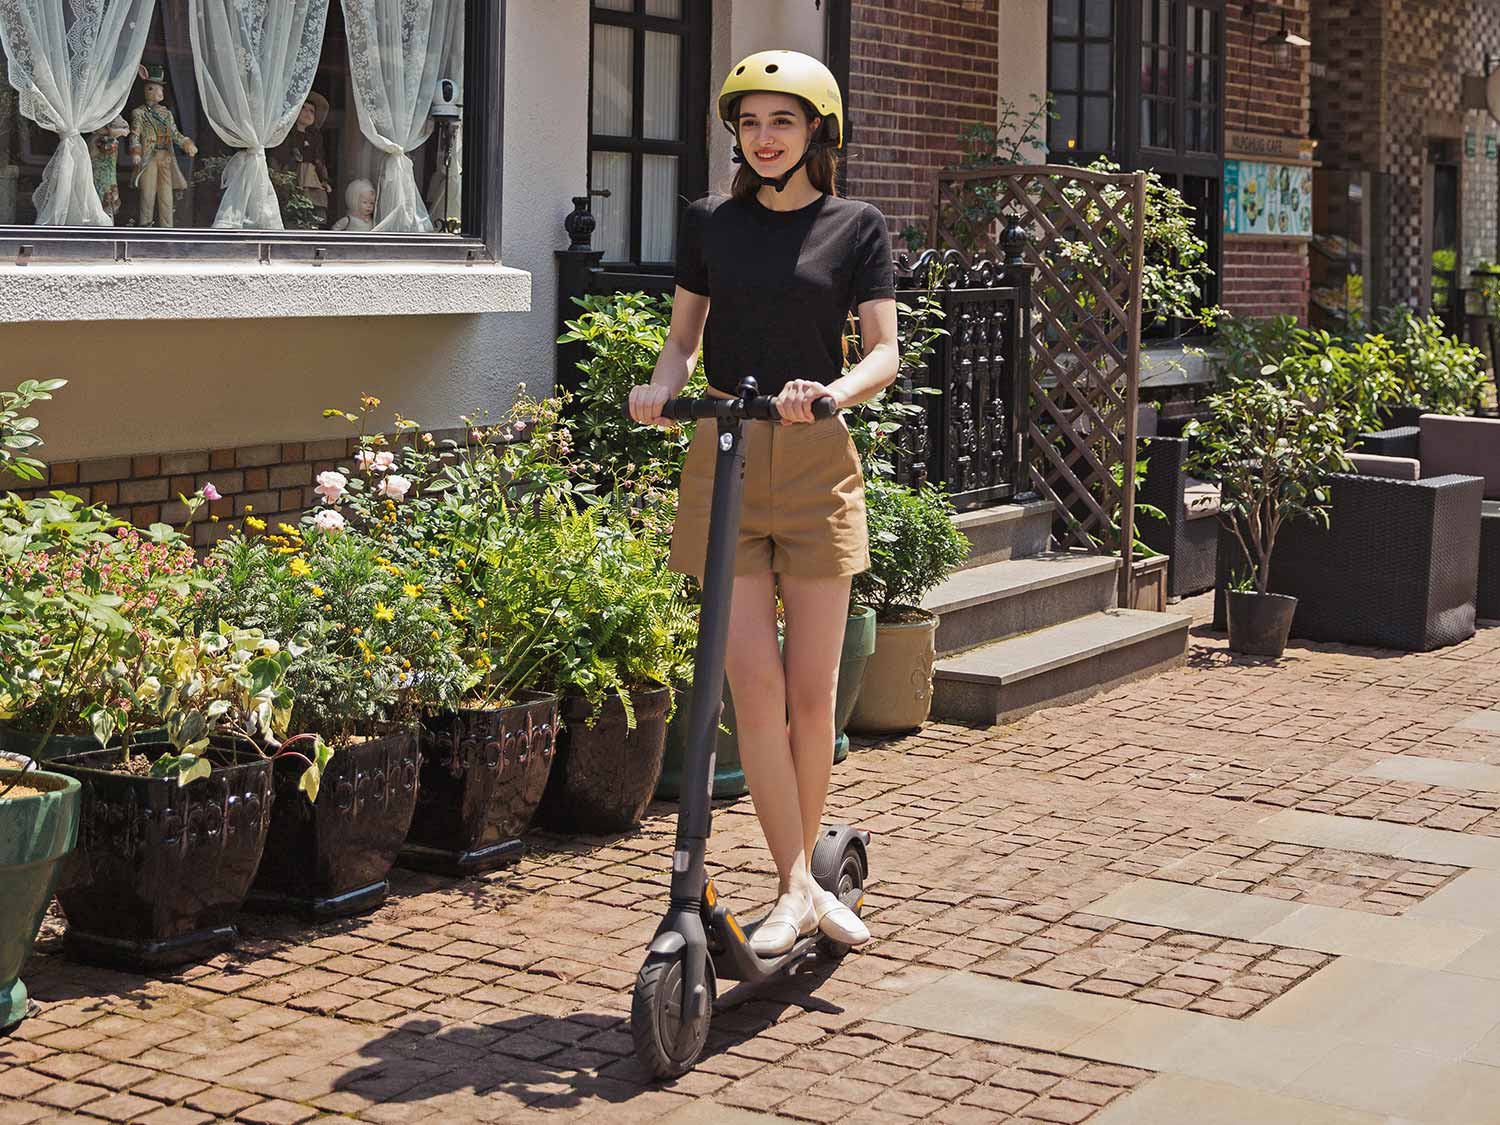 e4-5 electric scooter